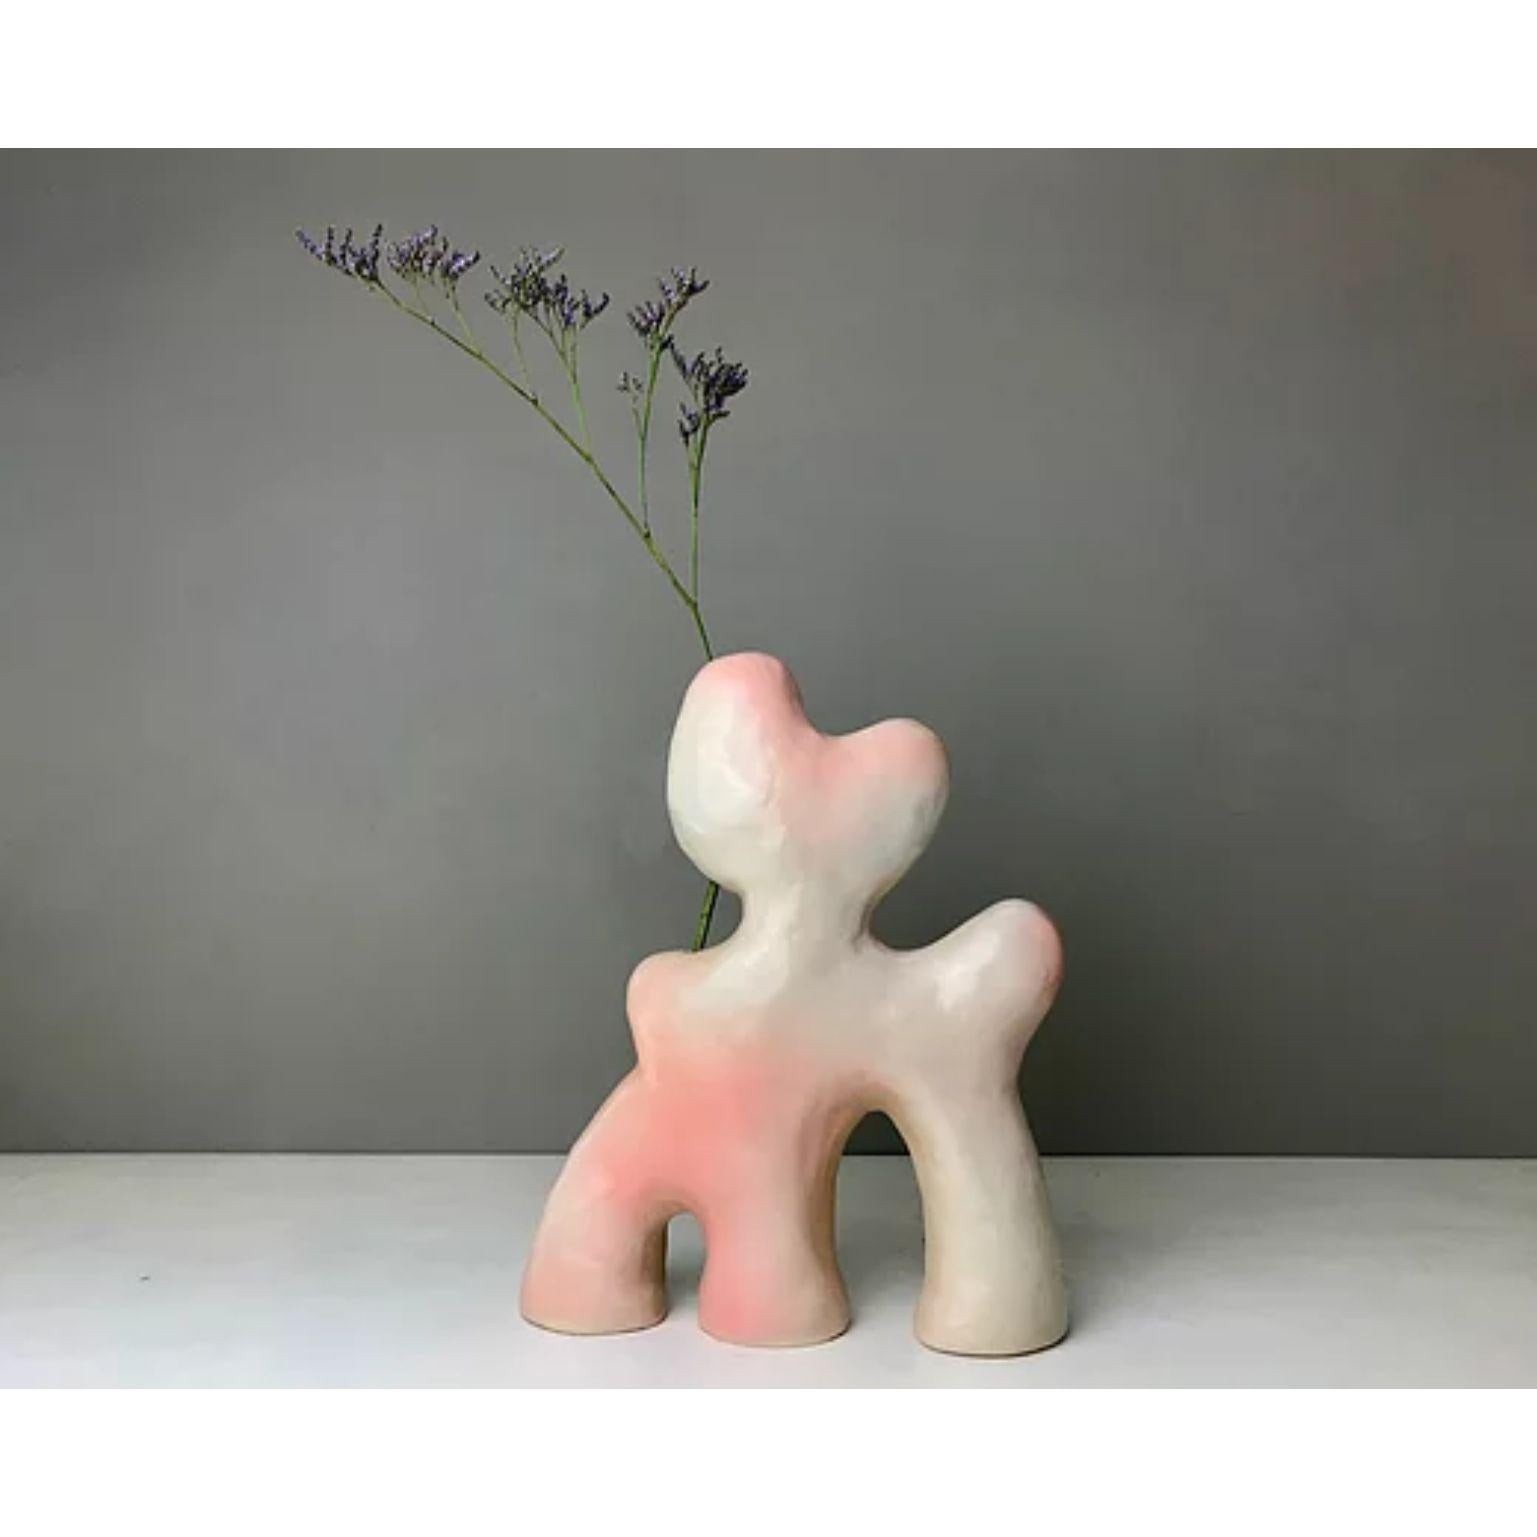 Grow vase by HS Studio
Surreal Real Collection 
Dimensions: 28 x 24 x 8cm
Materials: Ceramic

Hannah Simpson is a ceramic artist, based in Kent, UK. With a passion for creating unique items, Hannah's work continues to challenge the line between art